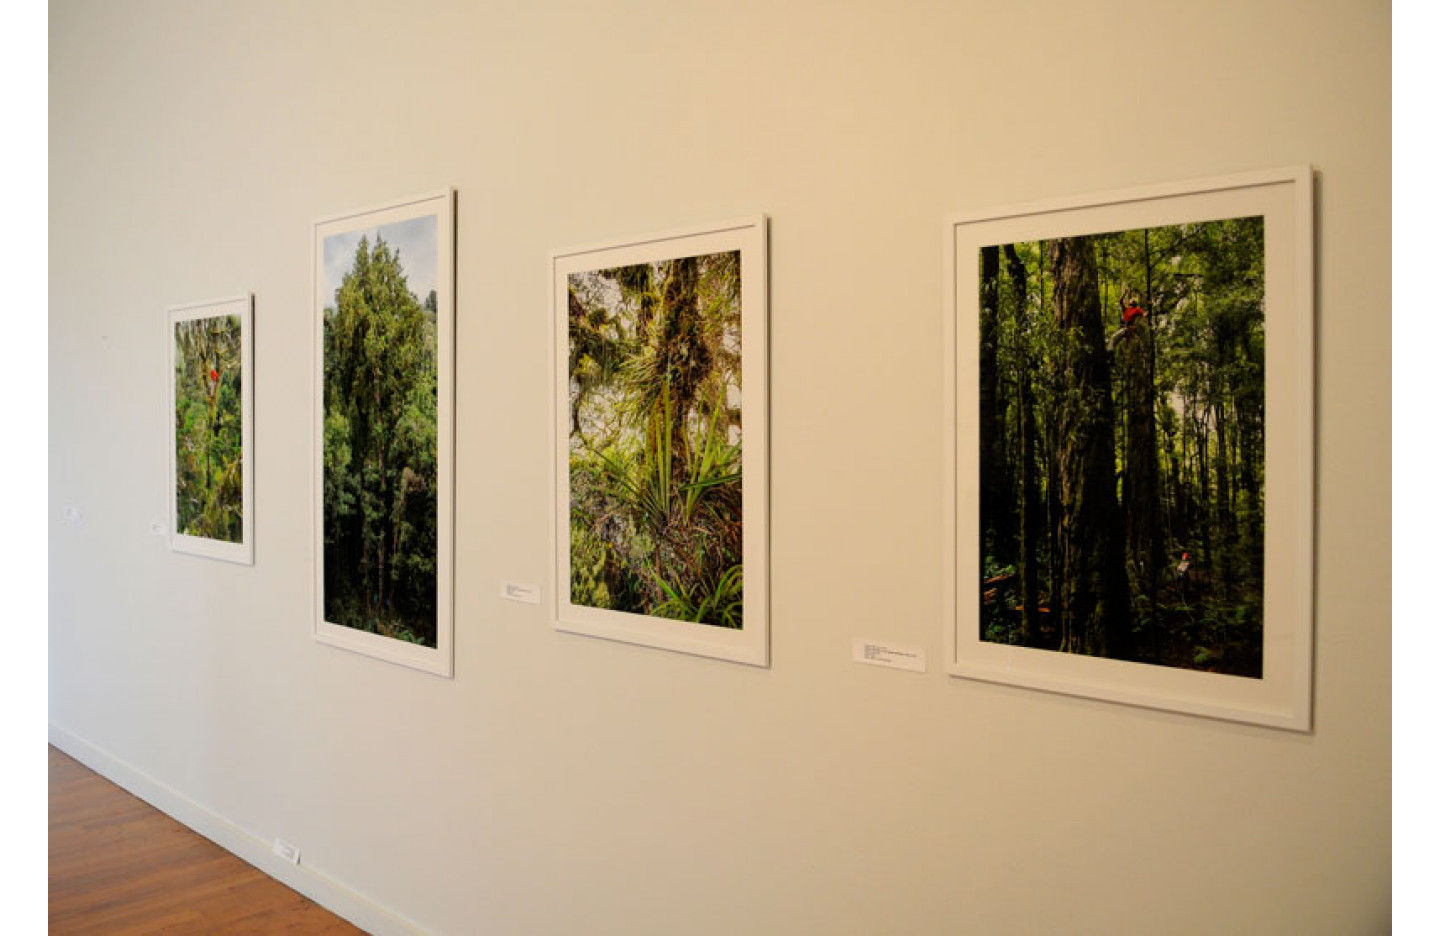 Installation Image of "The New Zealand Tree Project", Ramp Gallery Dec 2015. Including: Steven Pearce, Catherine Kirby and Andrew Harrison